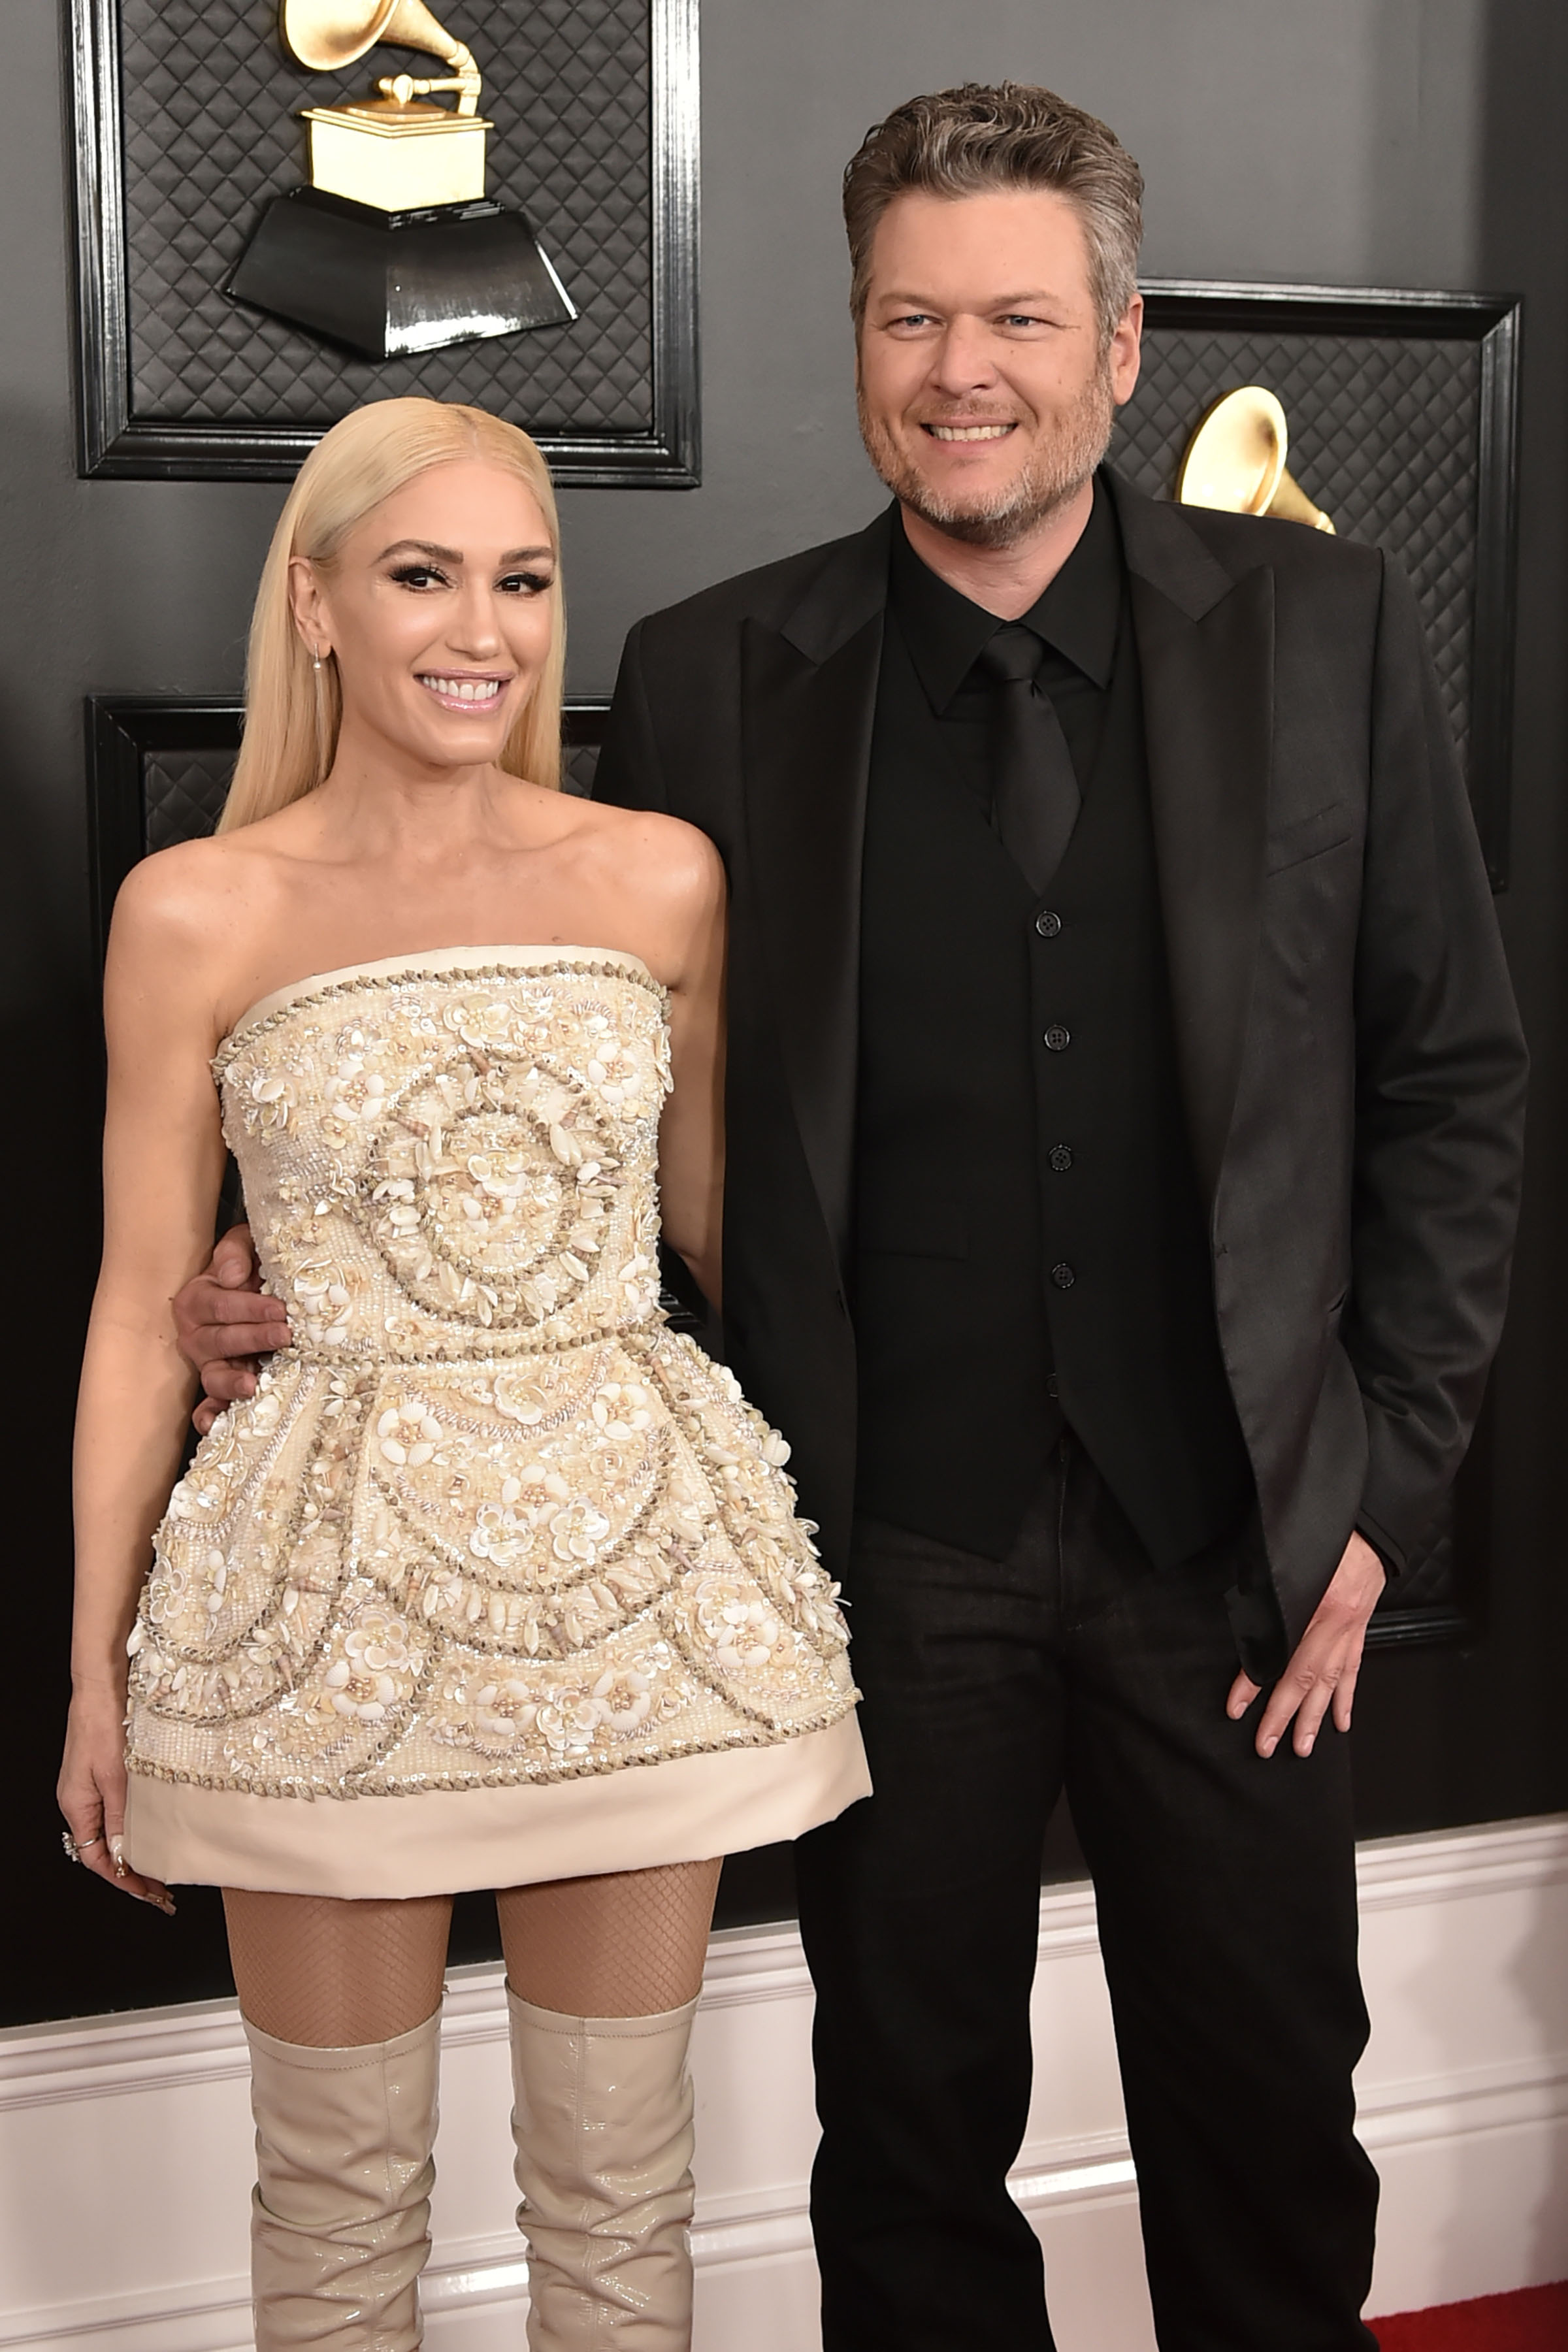 Blake is gearing up for his upcoming tour while Gwen is focused on her beauty brand and musical performances this spring